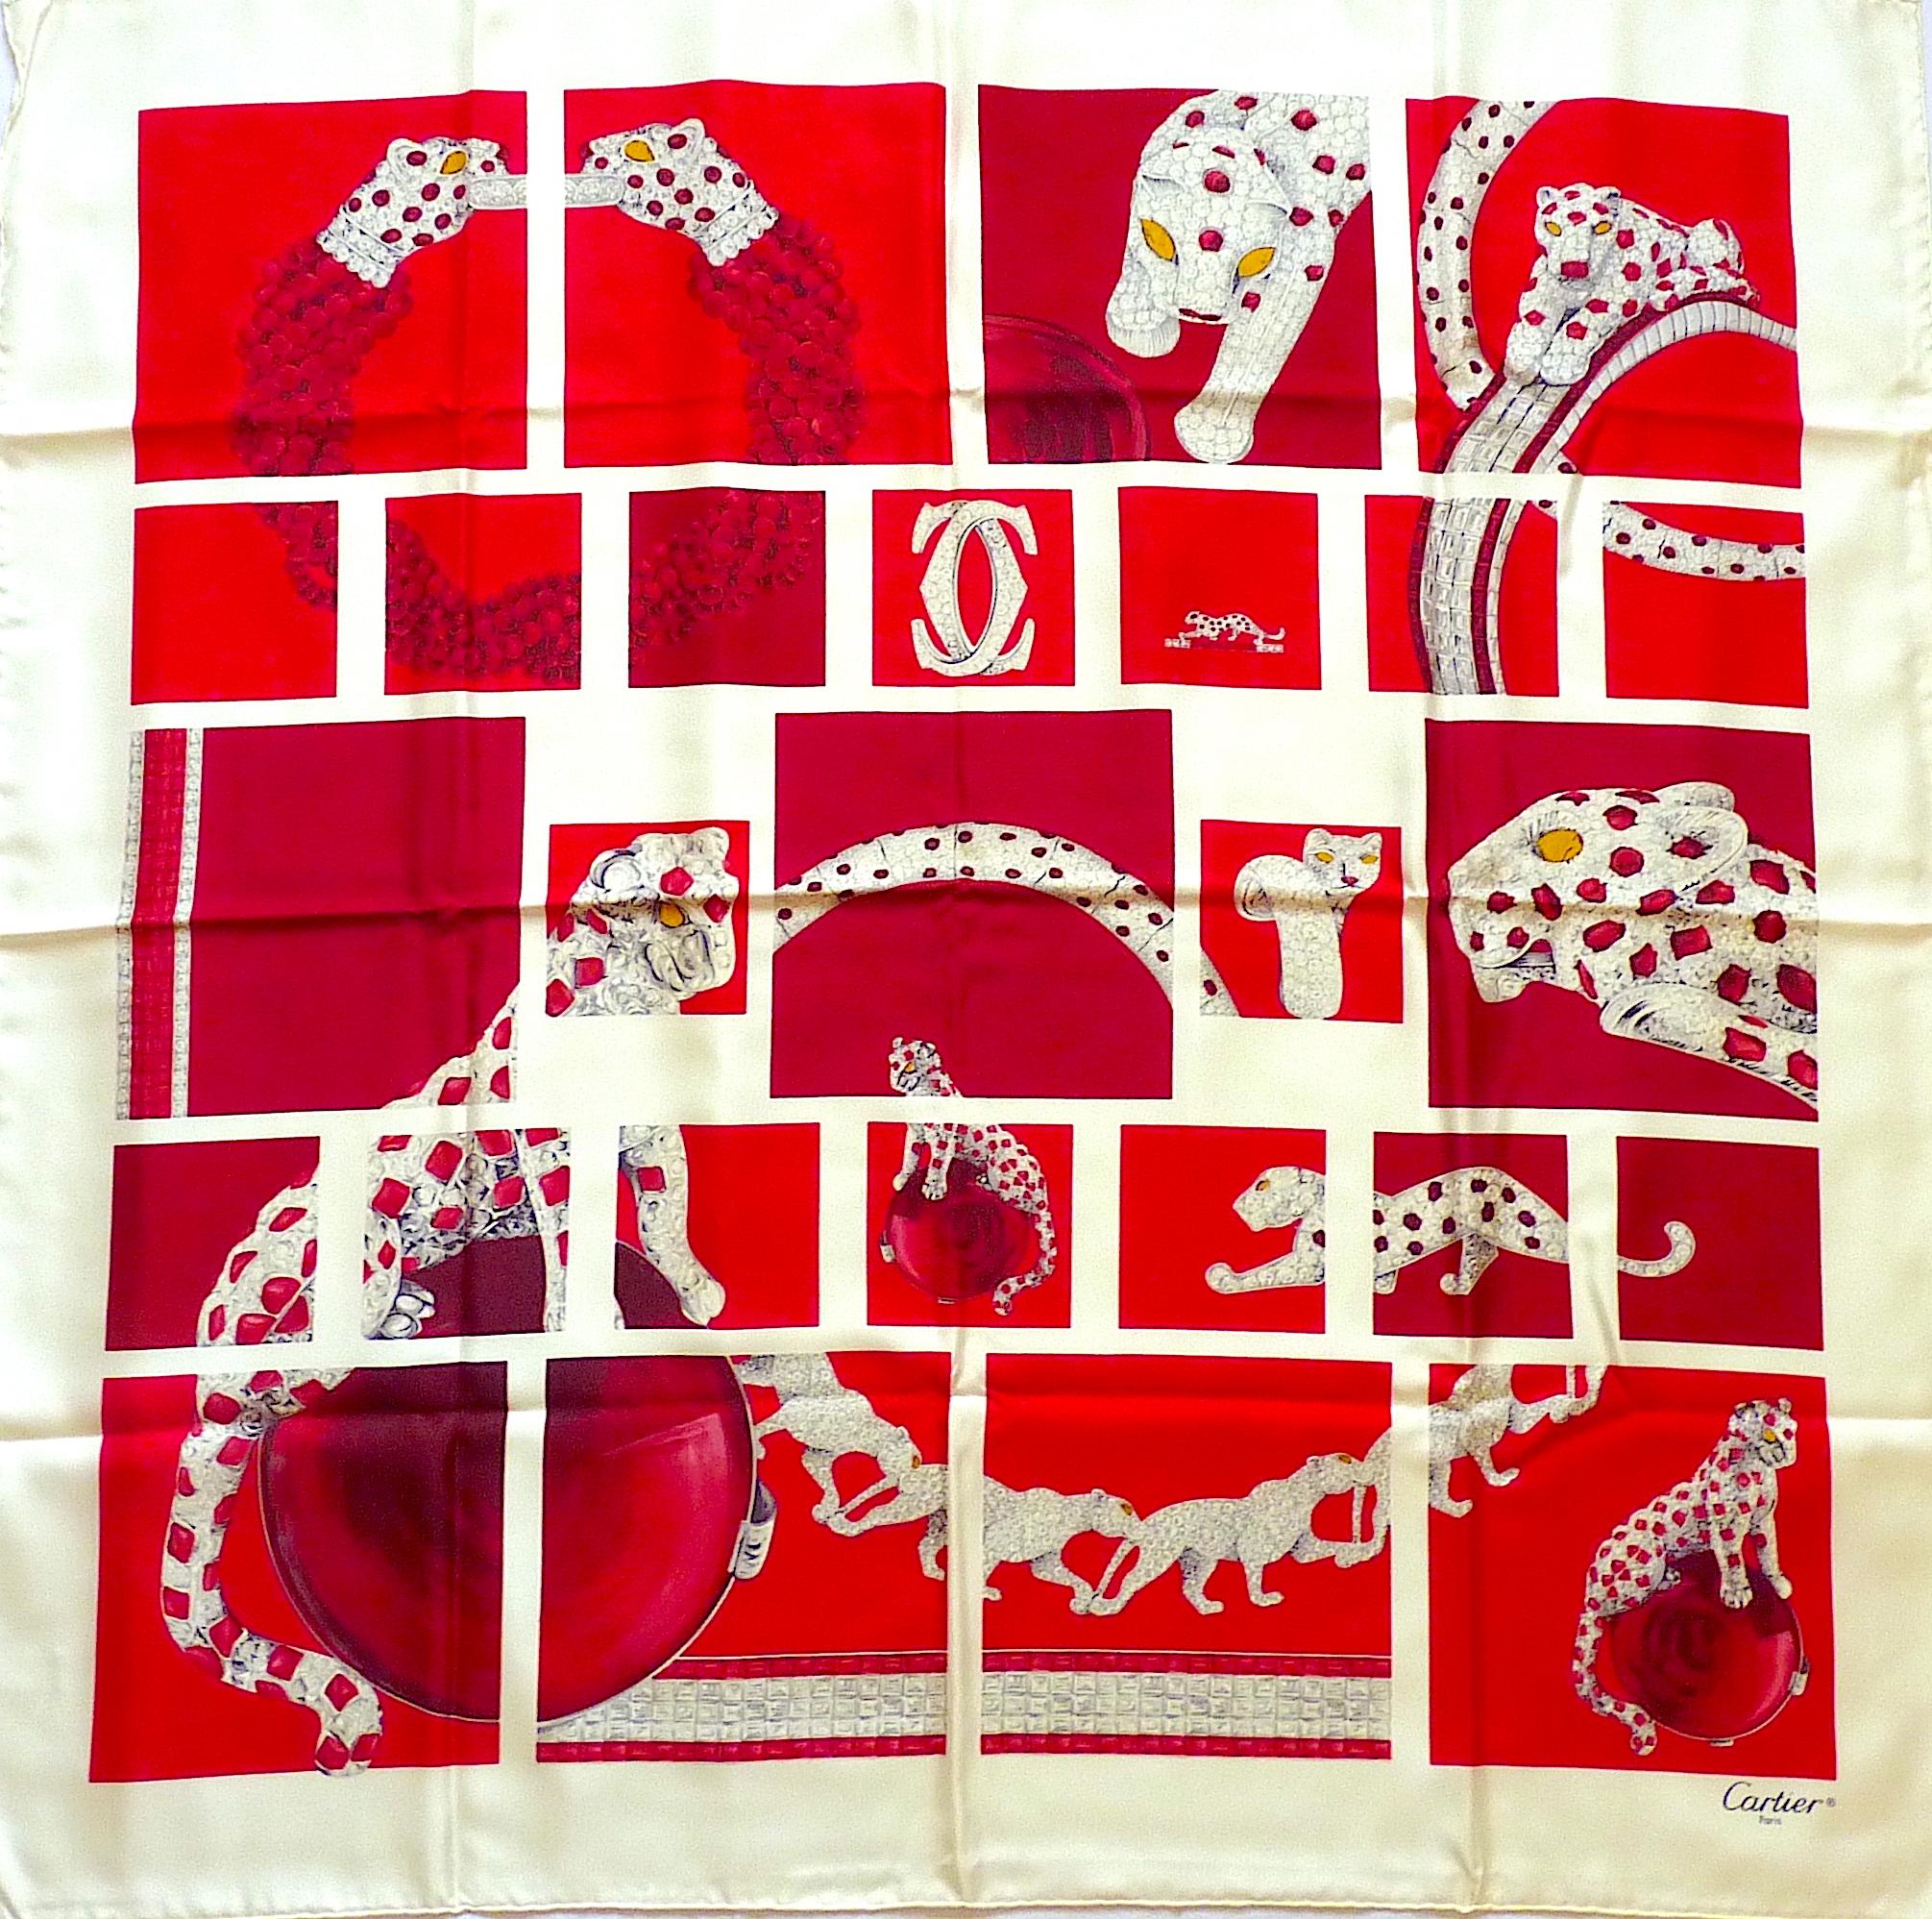 Iconic Cartier Panther Jeweled Silk Scarf, perfect condition with original Cartier Box 

Red and Cream White Pattern

CONDITION : Brand New in Box

Very Hard to find in such a Great Condition ! Perfect for Framing !

Care Tag attached, 100% Silk